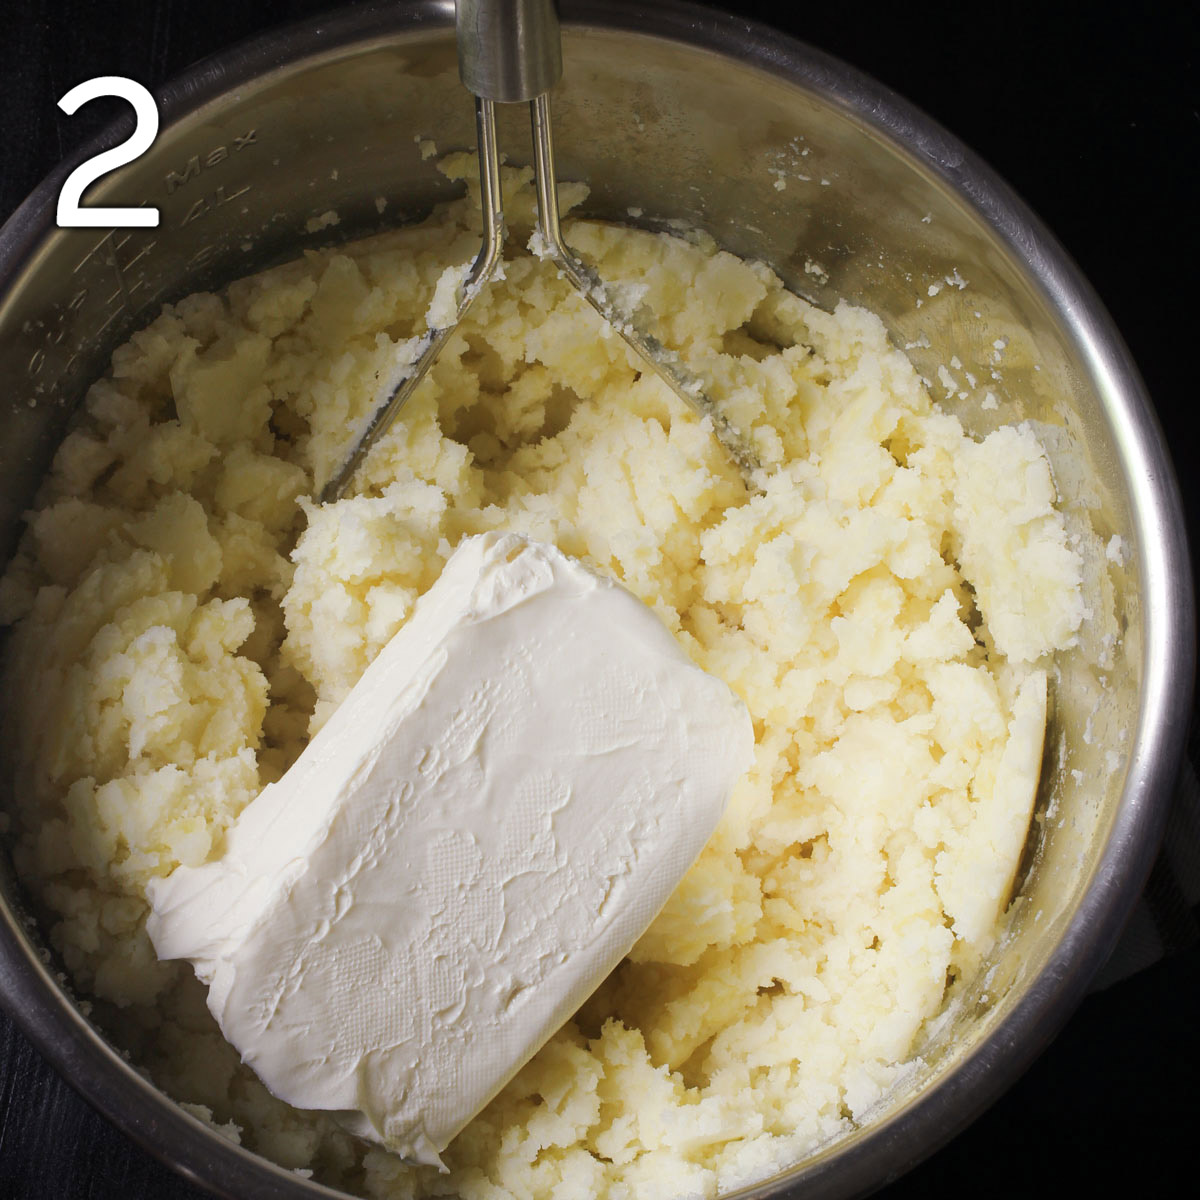 adding cream cheese to the mashed potatoes.